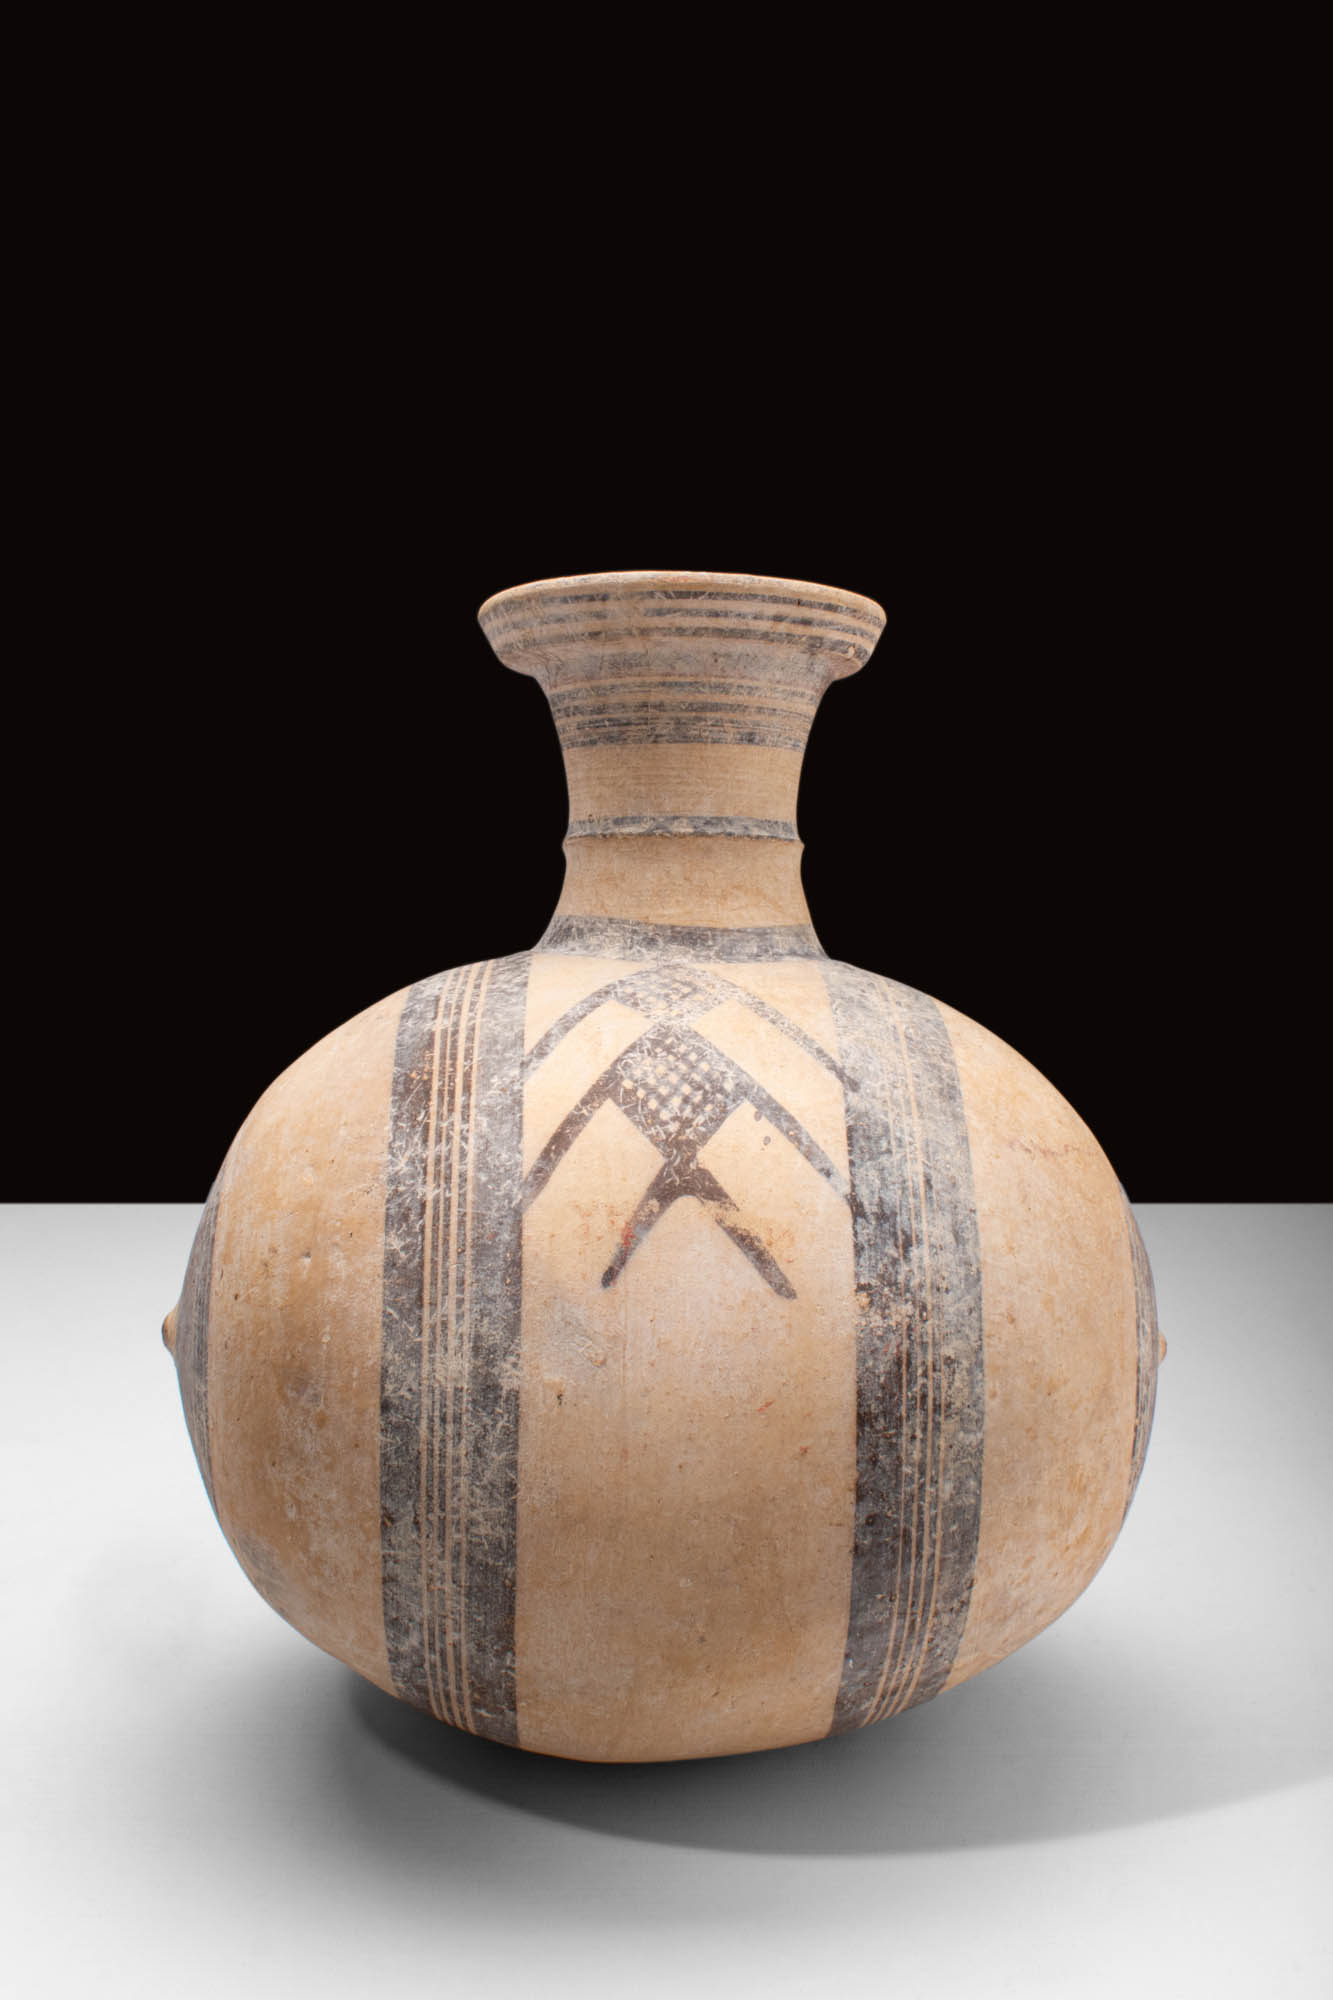 HUGE CYPRIOT JUG DECORATED WITH GEOMETRIC MOTIFS